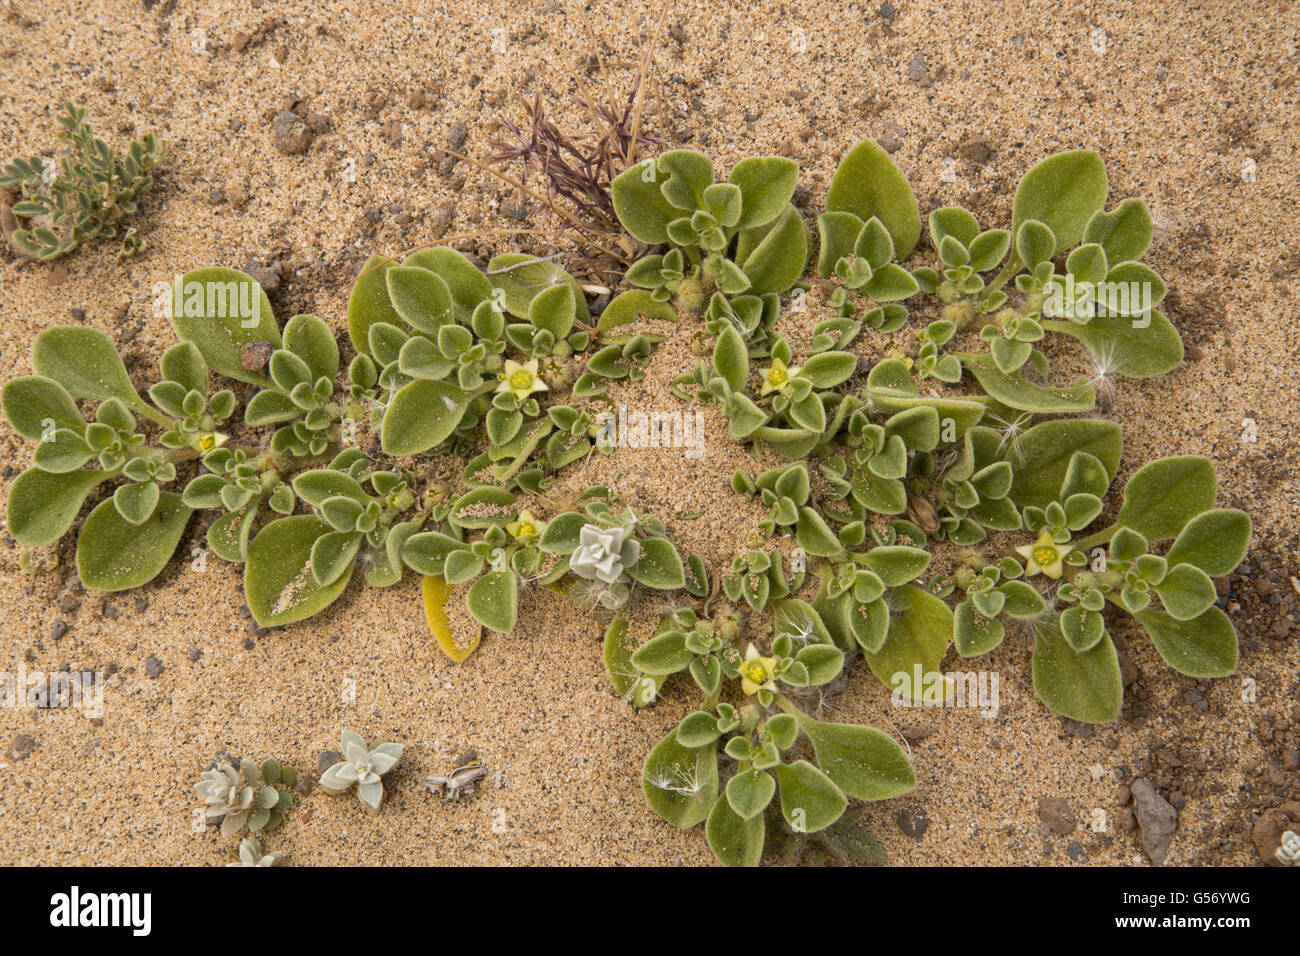 Canarian Iceplant (Aizoon canariense) flowering, Lanzarote, Canary Islands, March Stock Photo